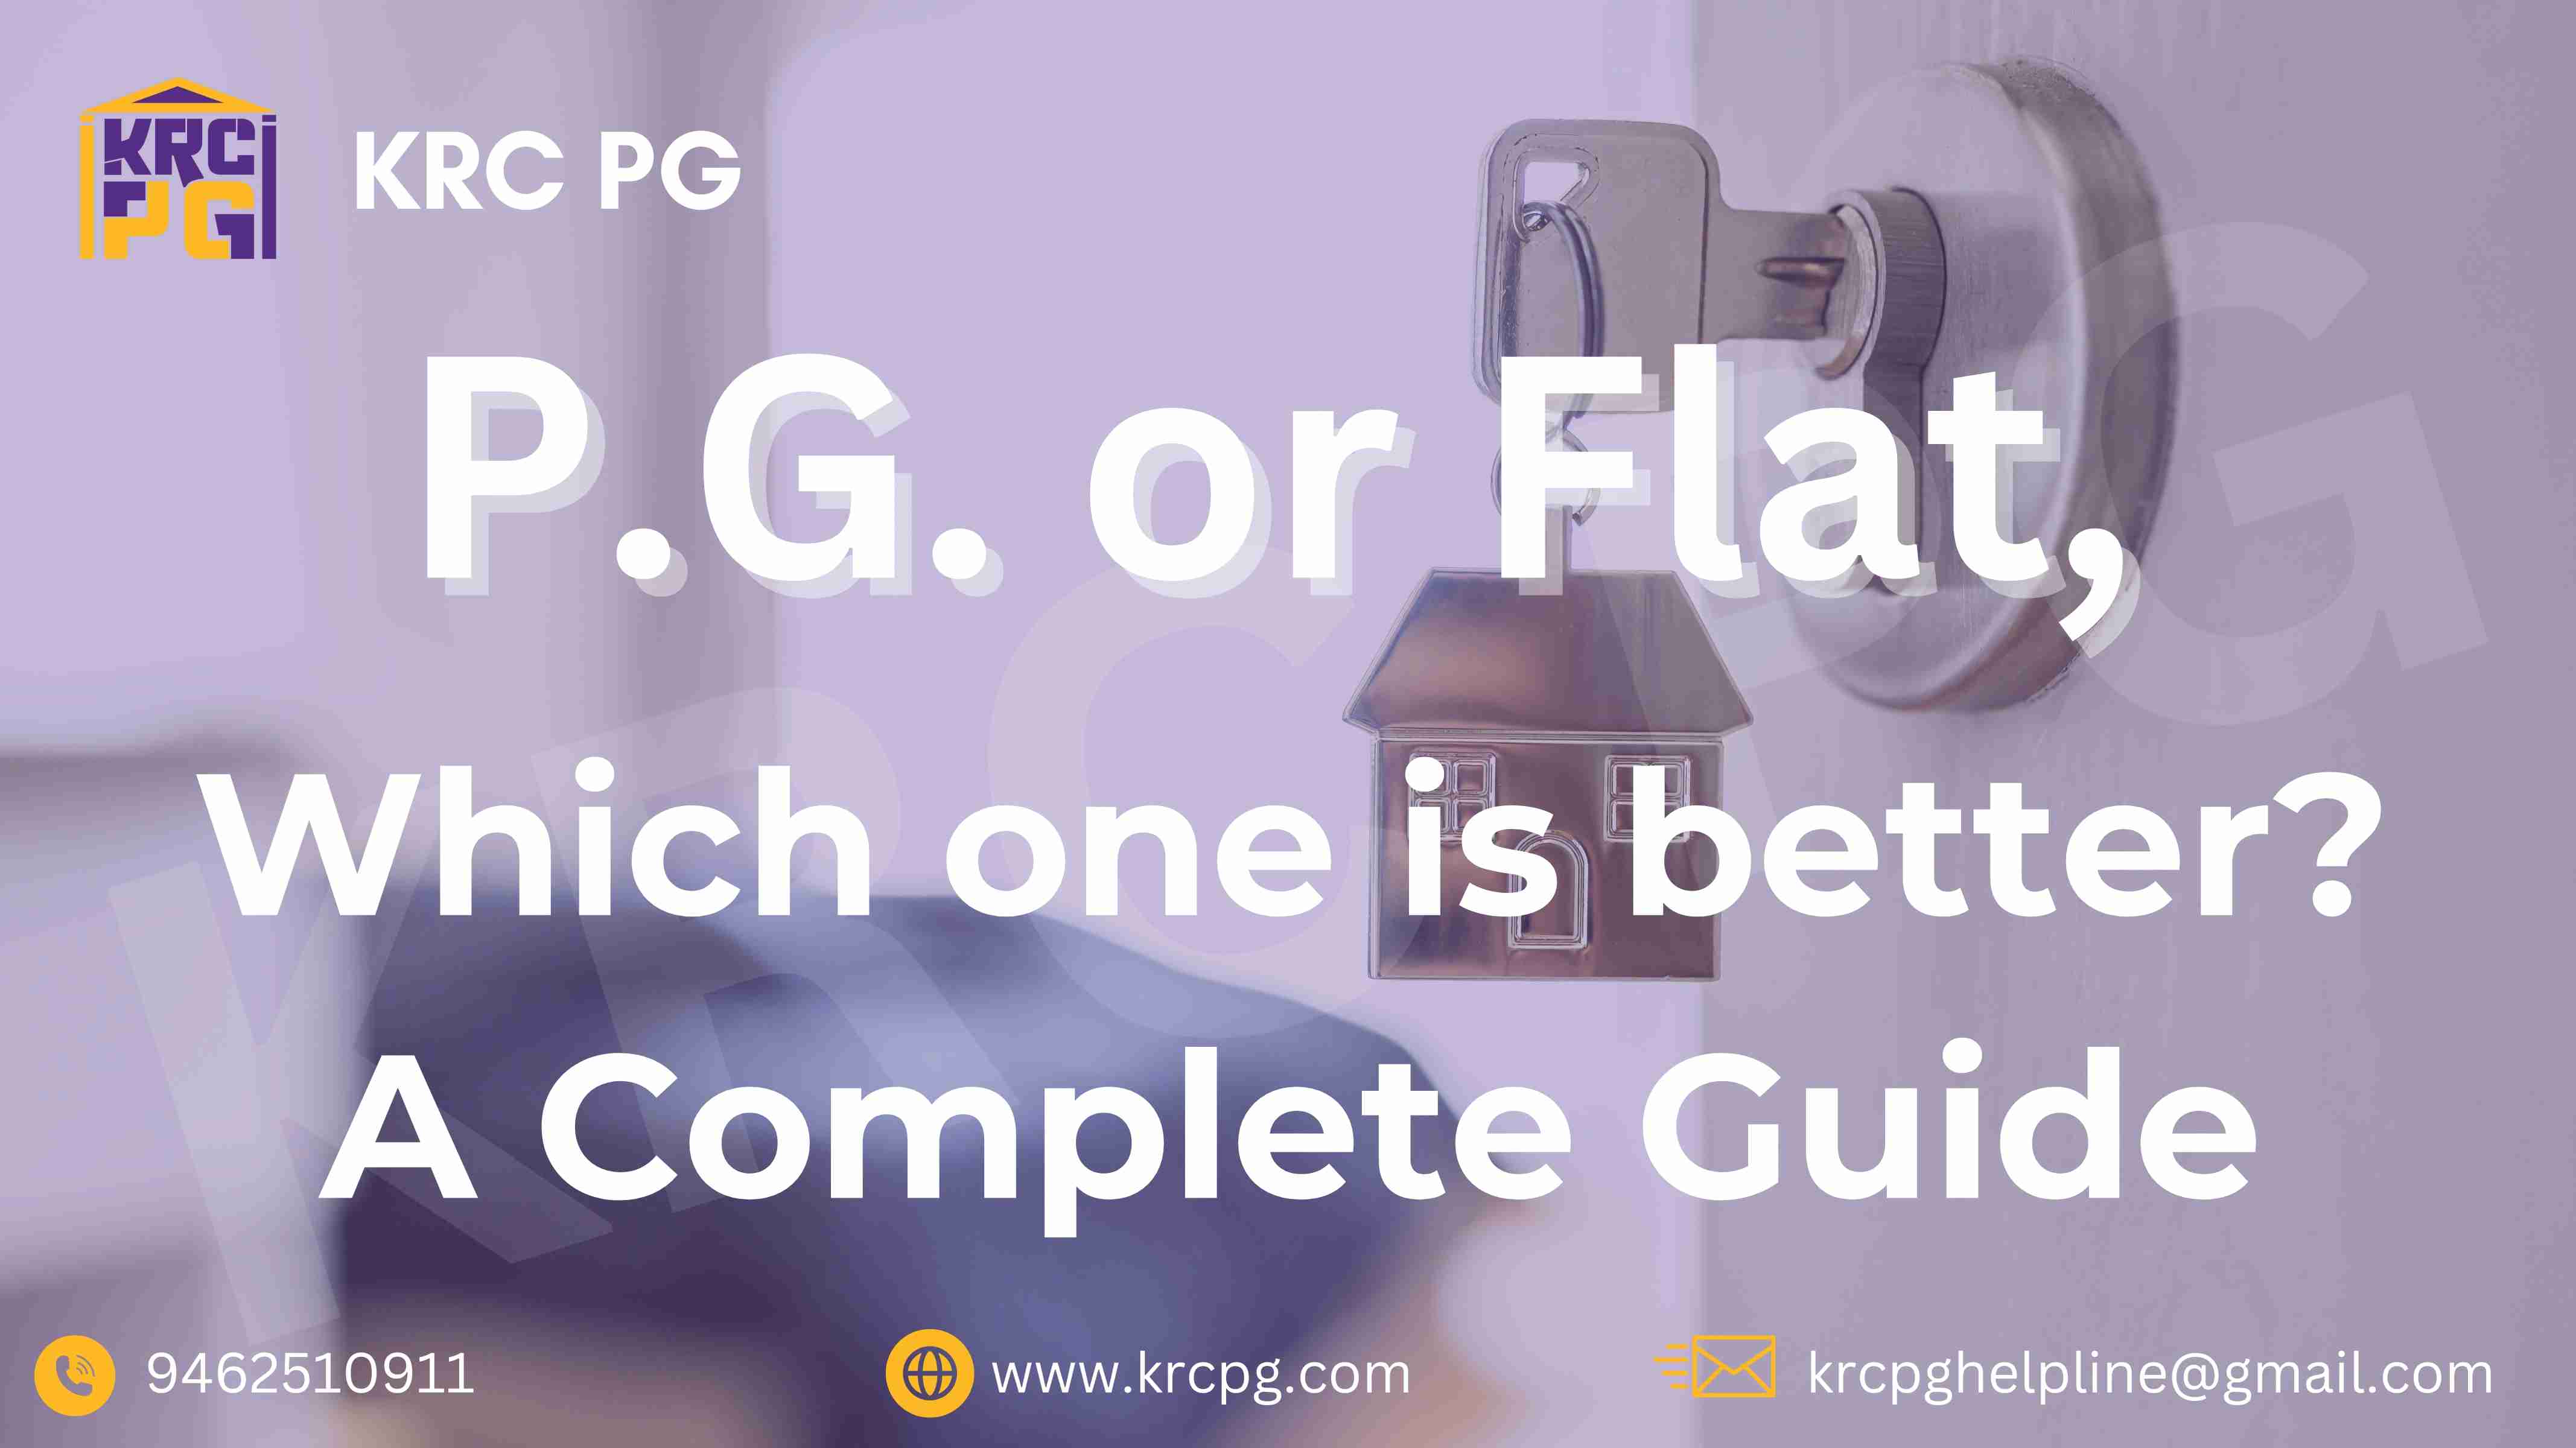 P.G. or Flat, Which one is better?  A Complete Guide